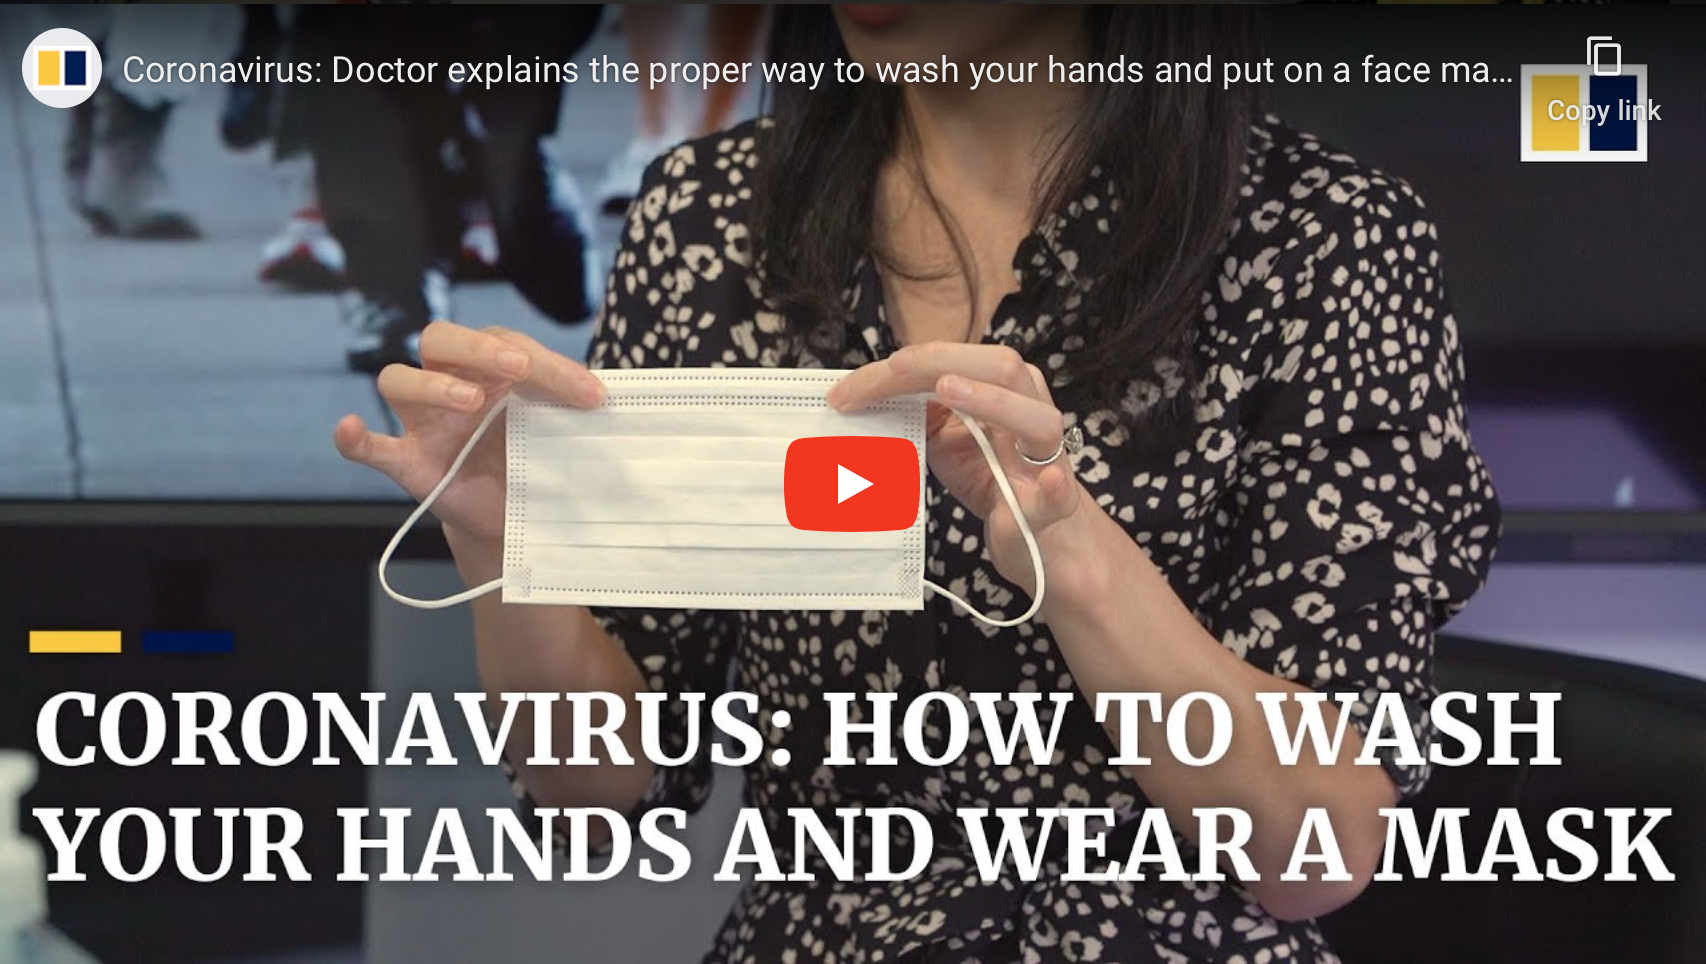 Video: How to wear a mask & wash your hands